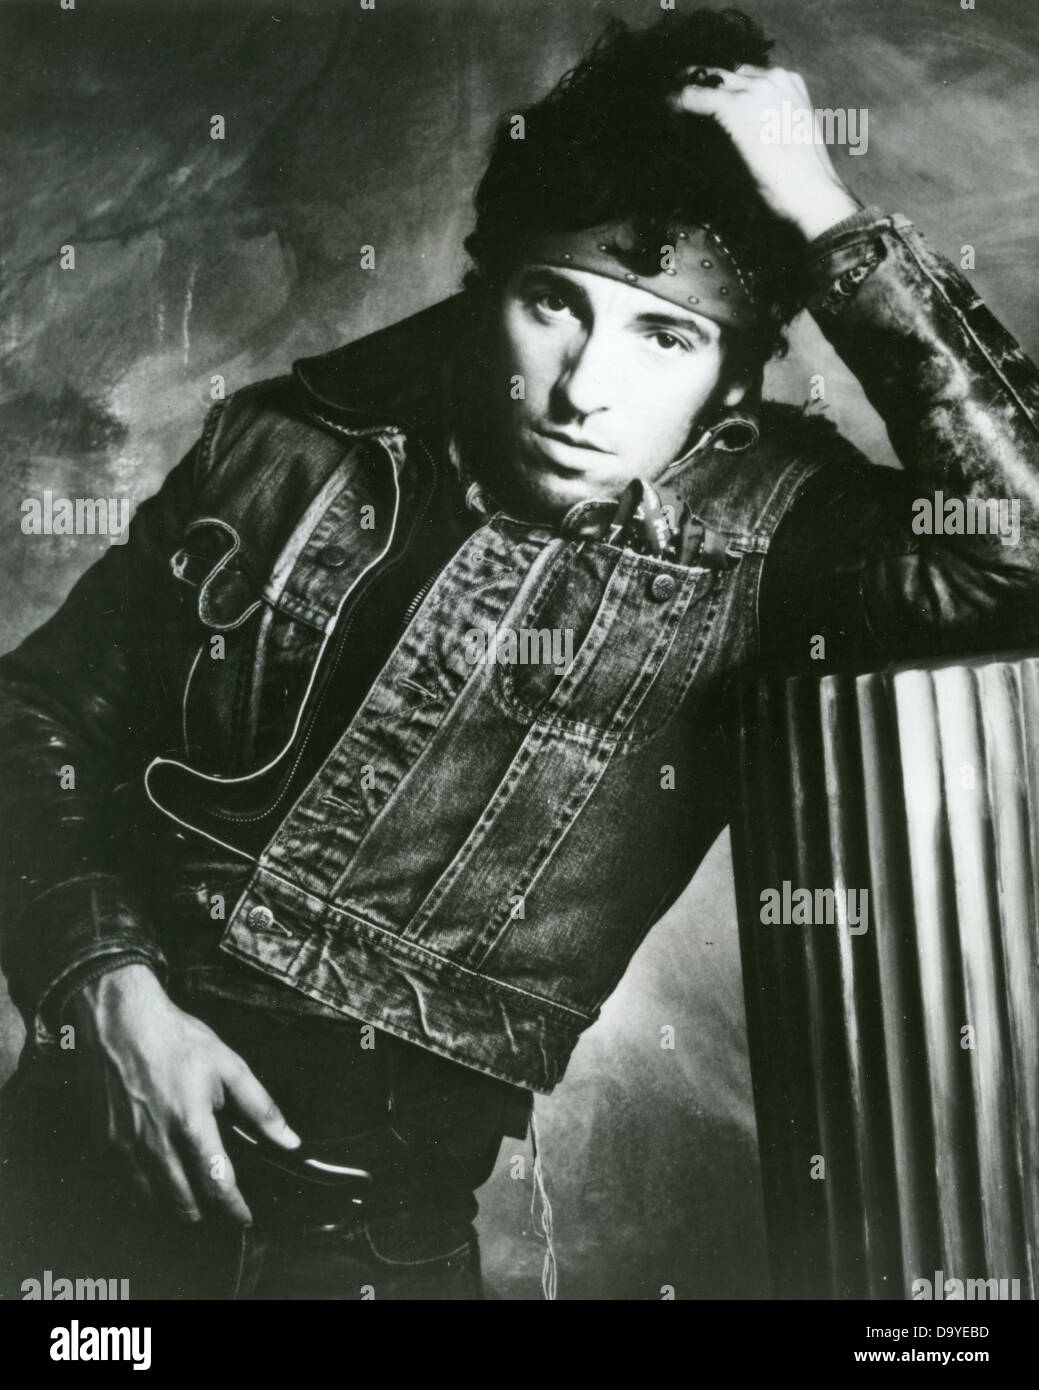 BRUCE SPRINGSTEEN Promotional photo of US rock musician about 1972 Stock Photo